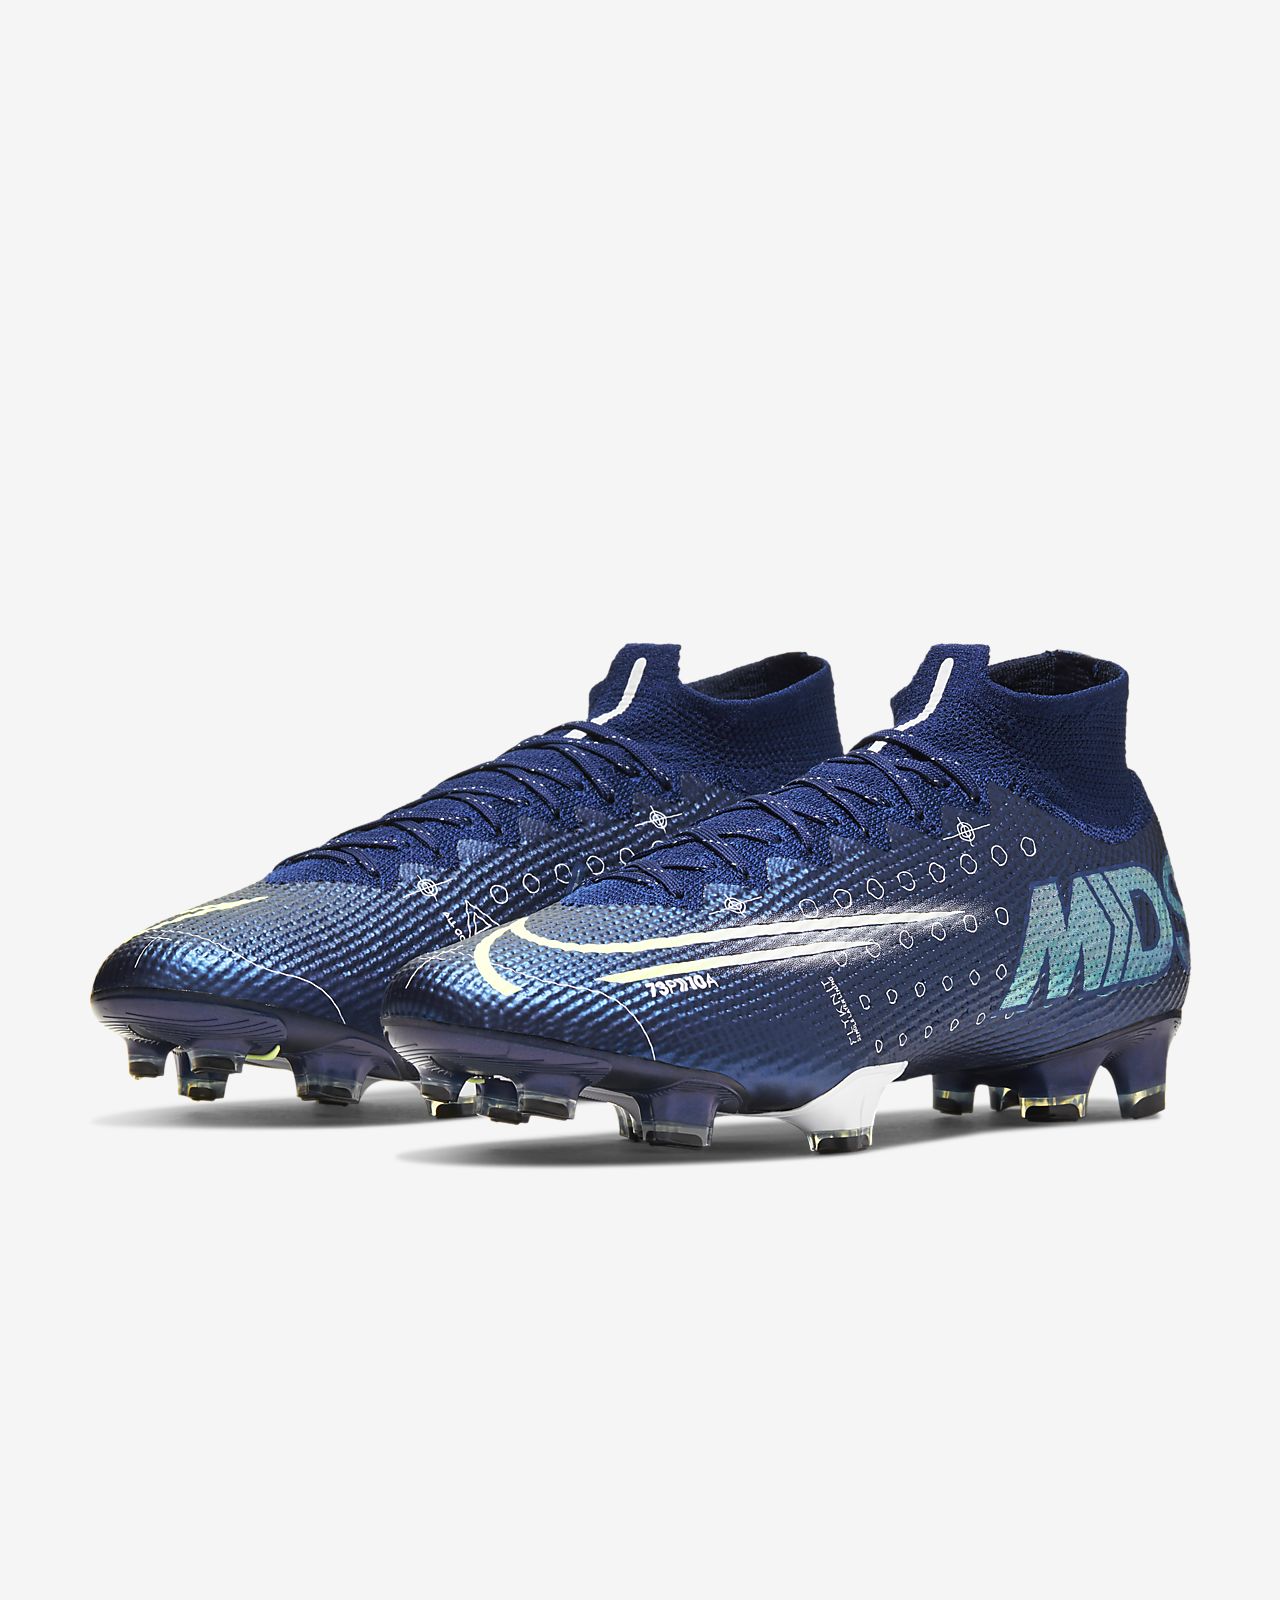 Nike Mercurial Superfly 7 Elite Mds Fg Firm Ground Soccer Cleat